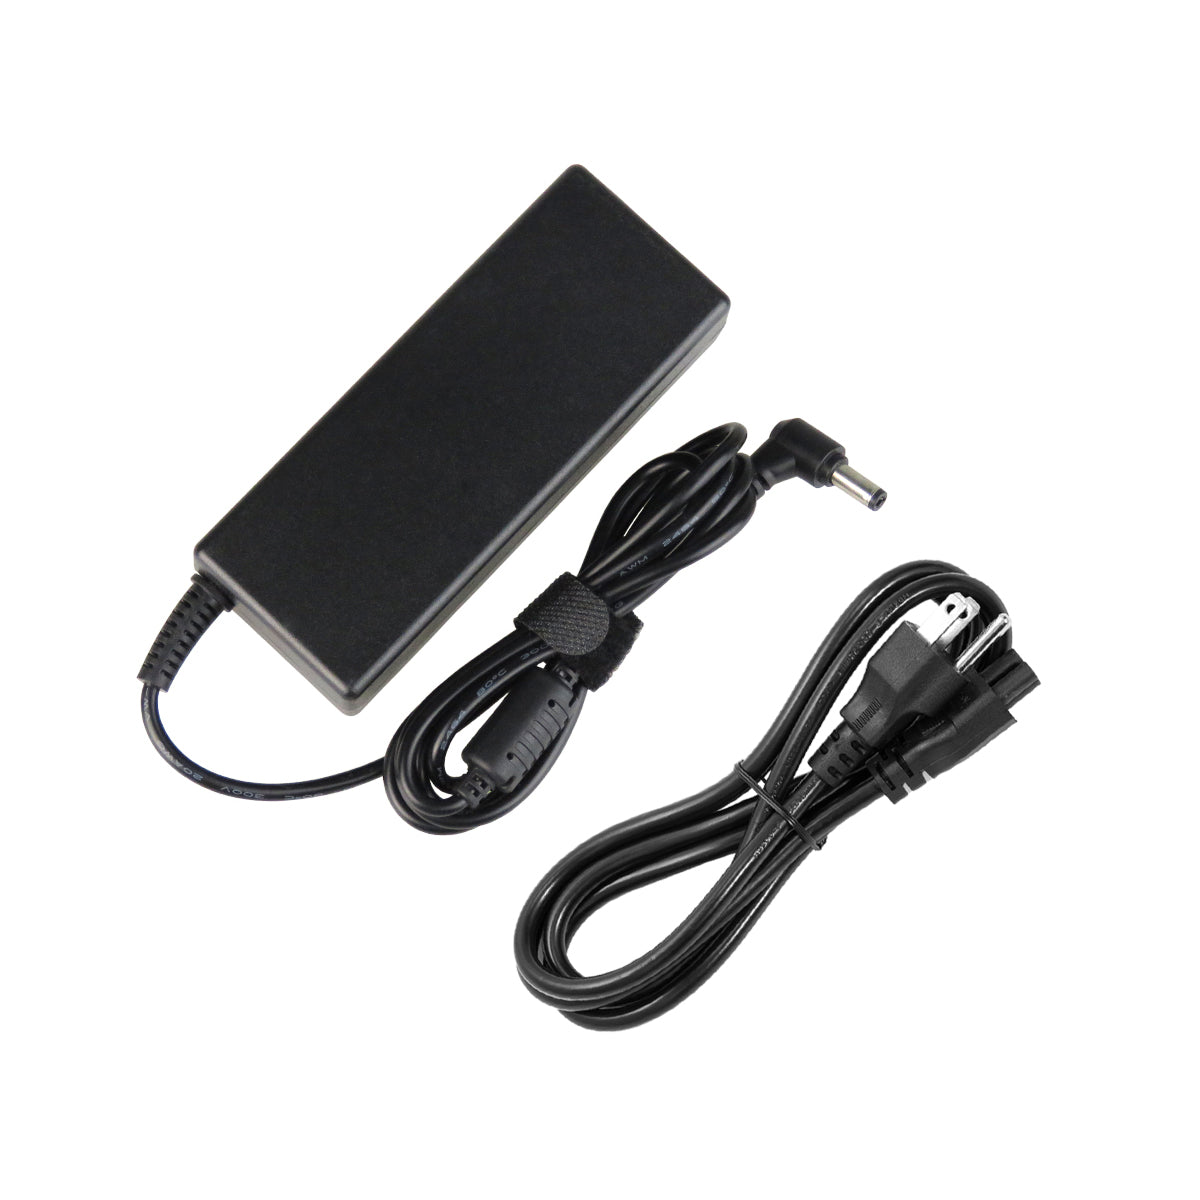 AC Adapter Charger for ASUS K53TK Notebook.